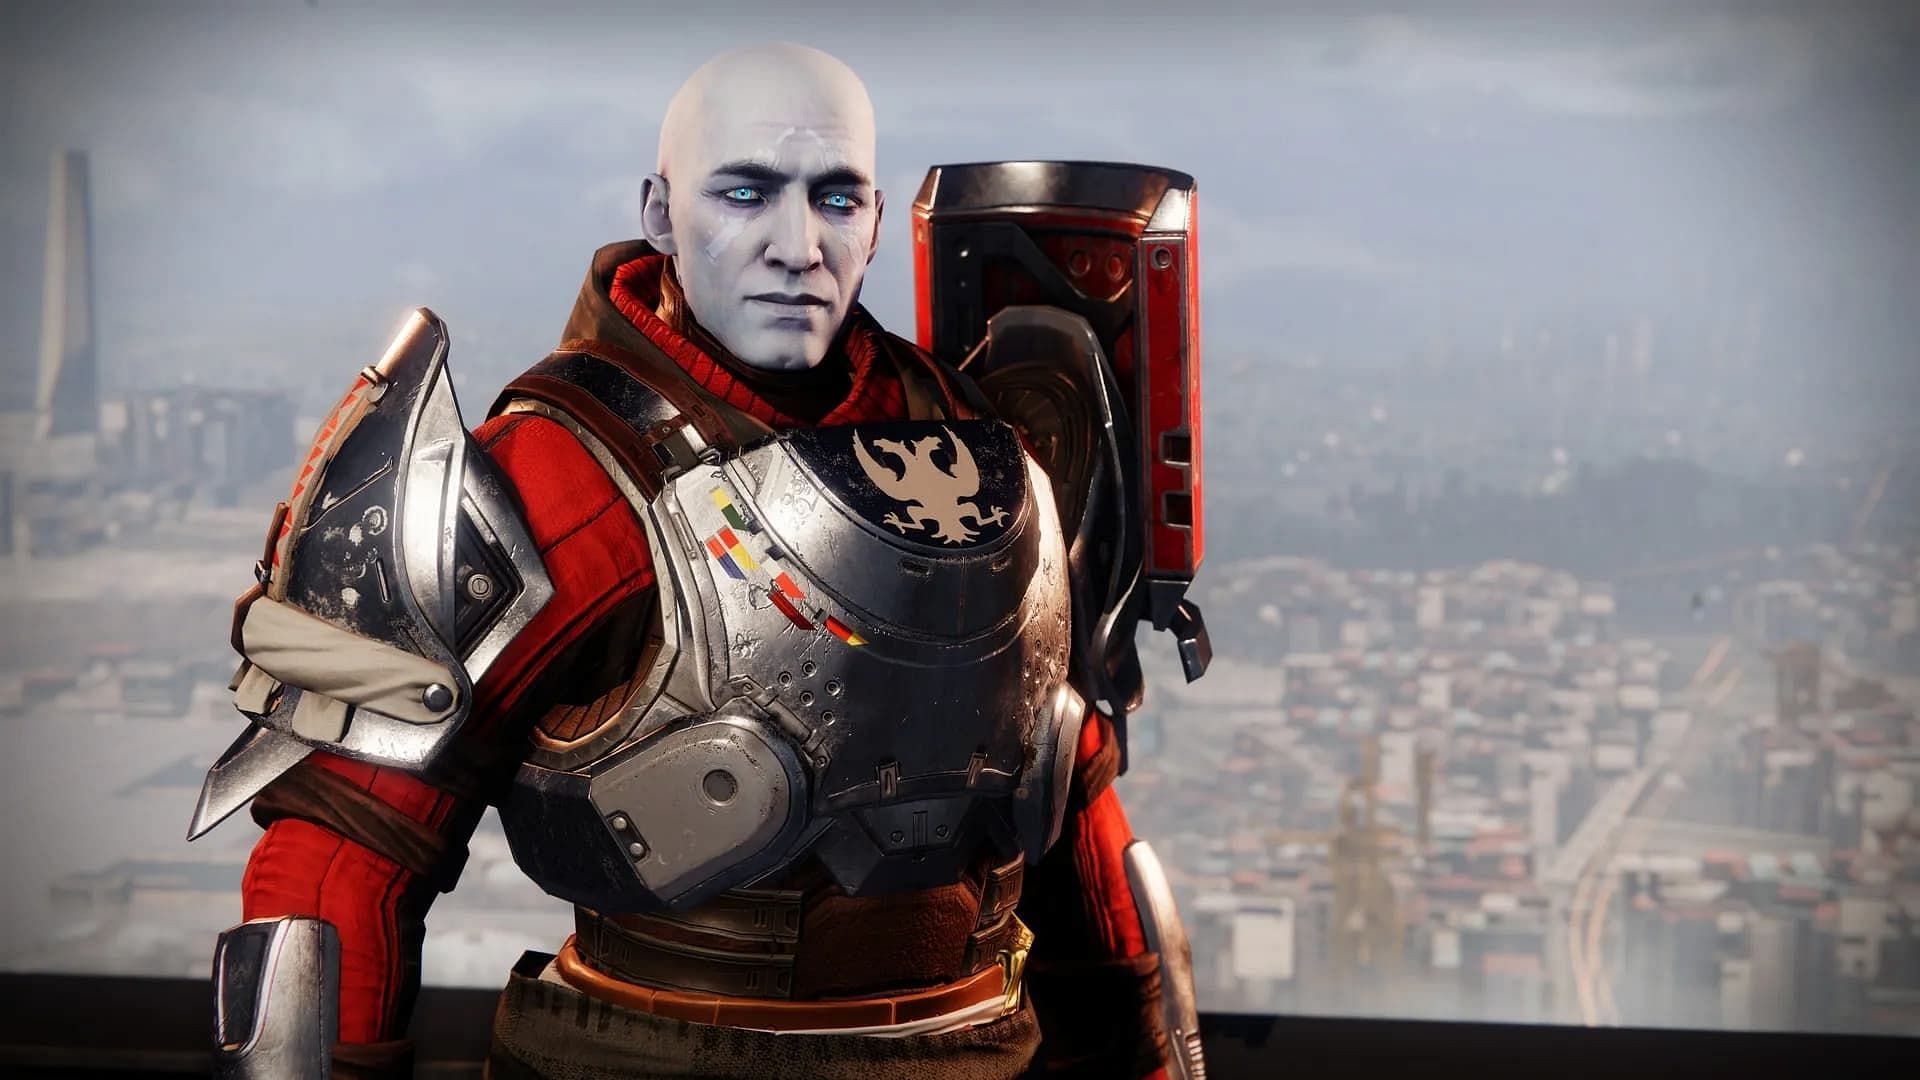 You can get some free shaders from Commander Zavala too by progressing through his reward track. 